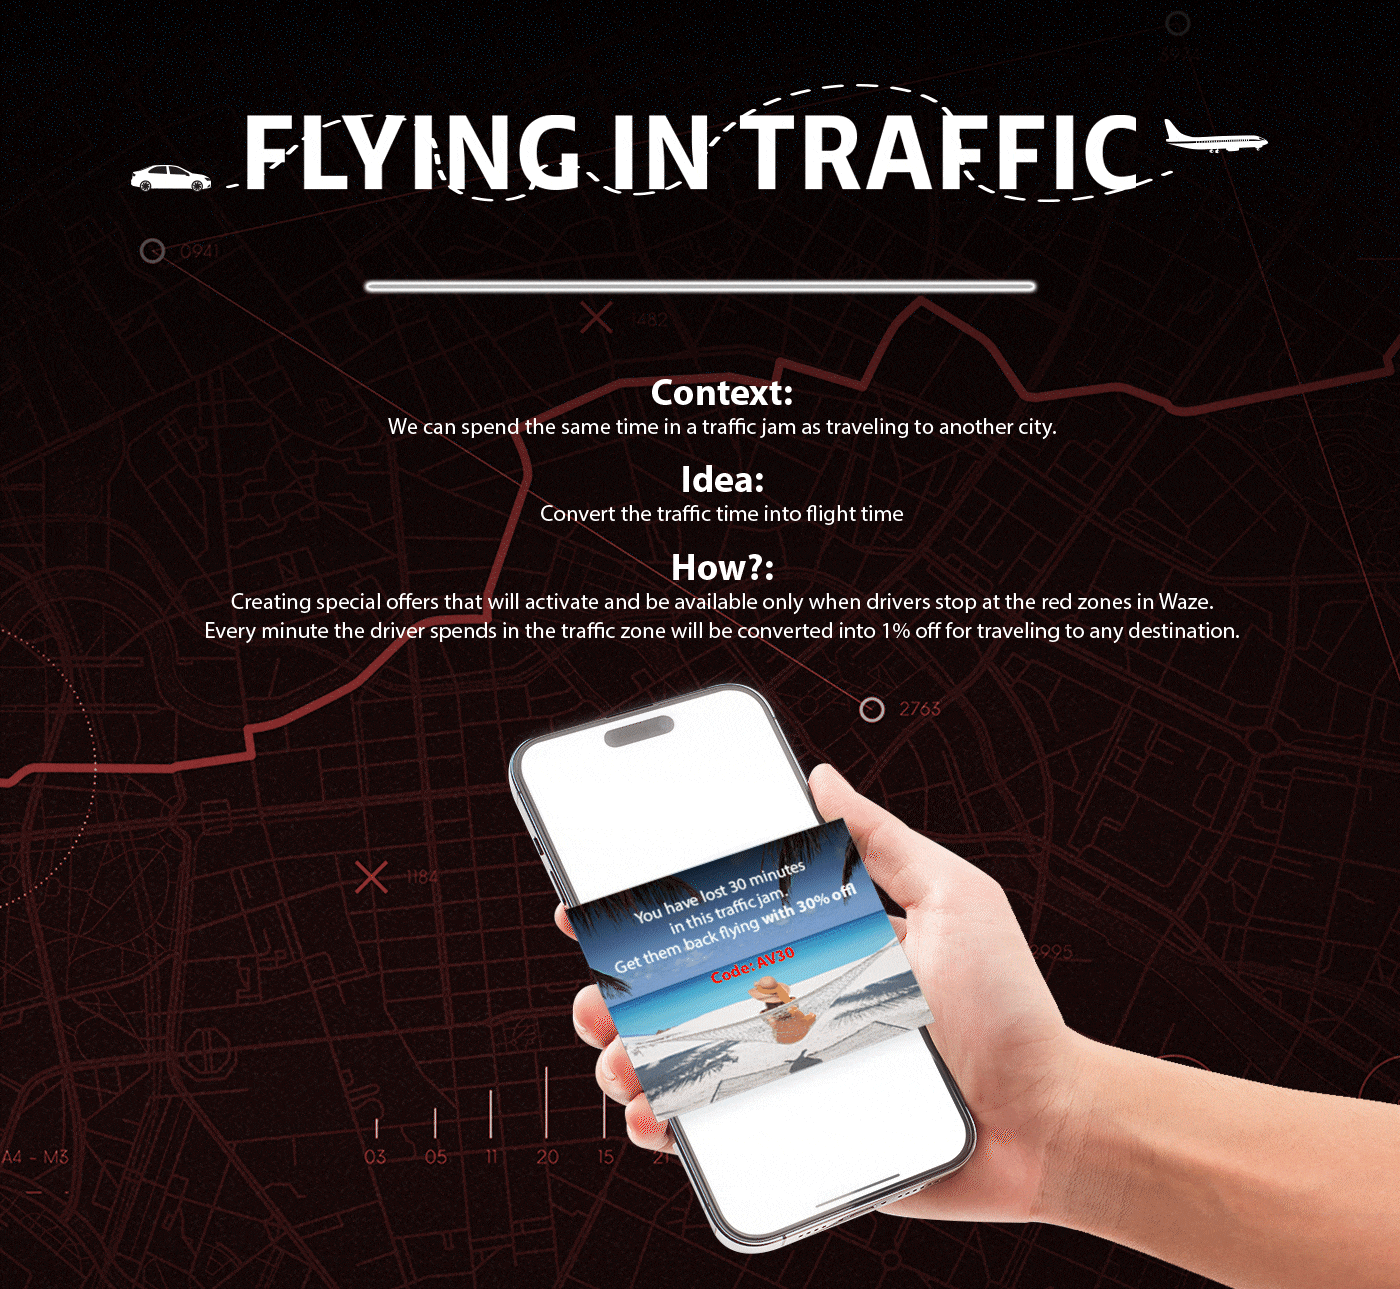 Advertising  marketing   airline airplane Travel traffic Waze campaign Avianca Fly